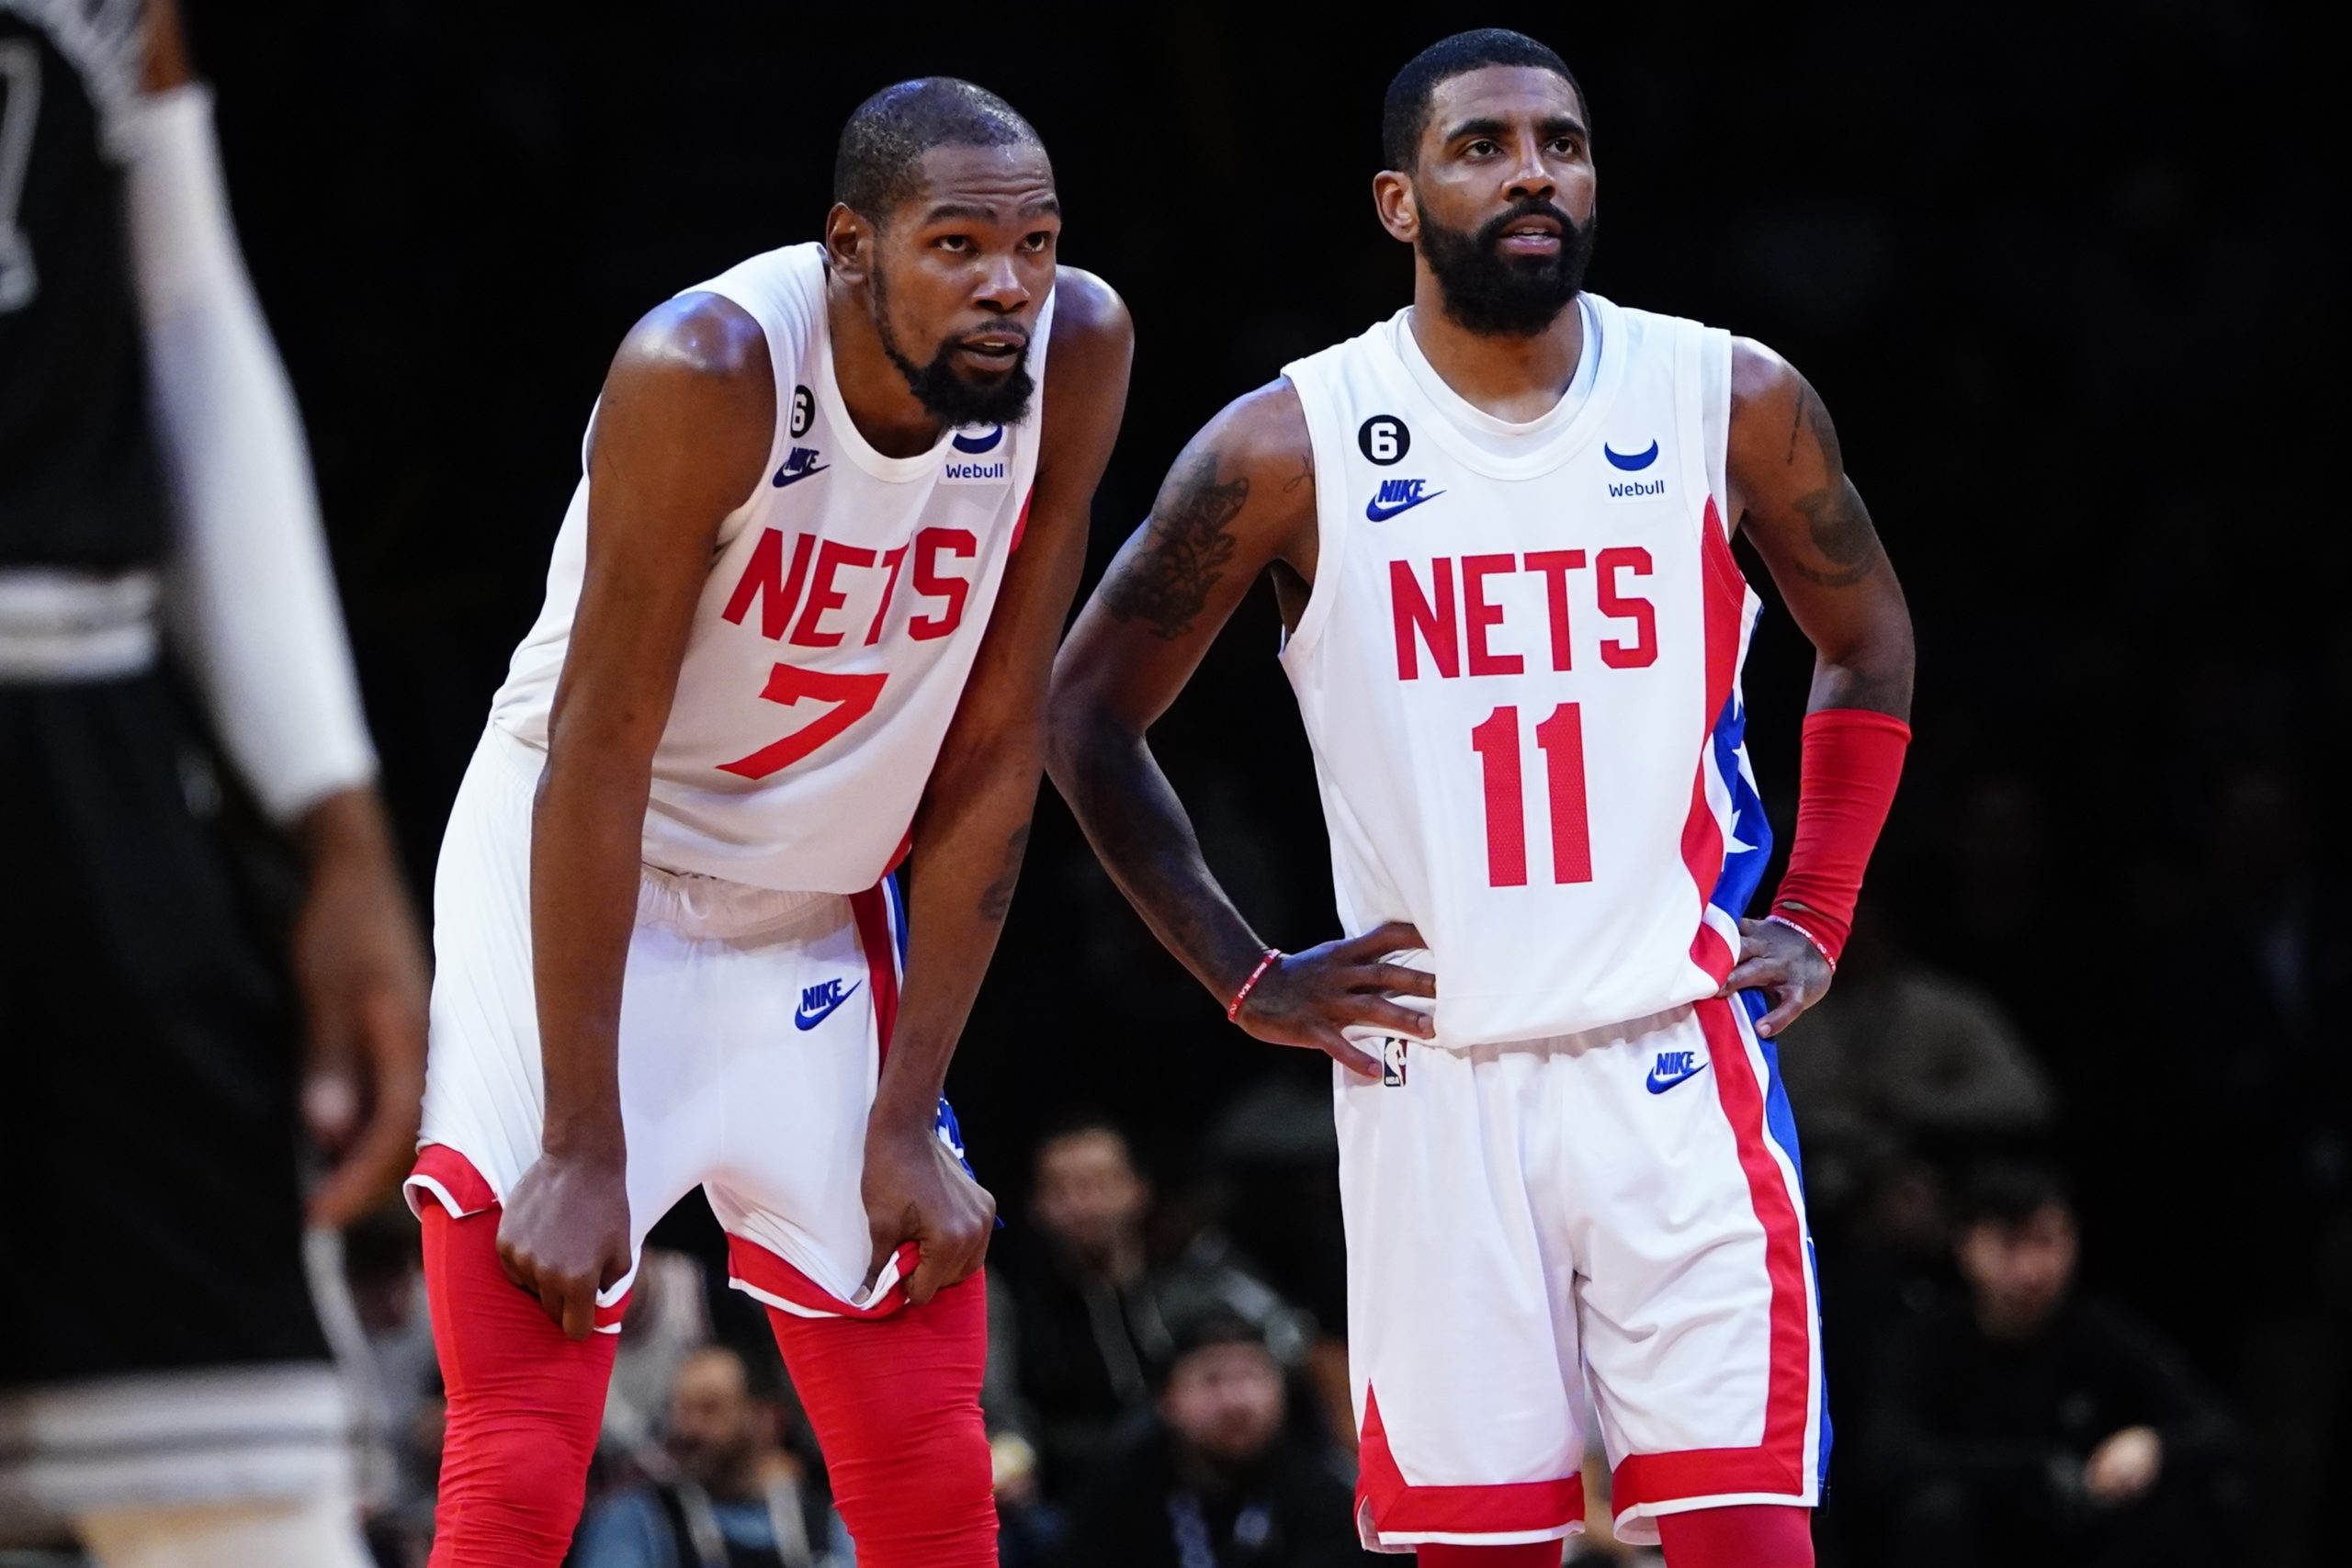 New year, same old streak for Nets